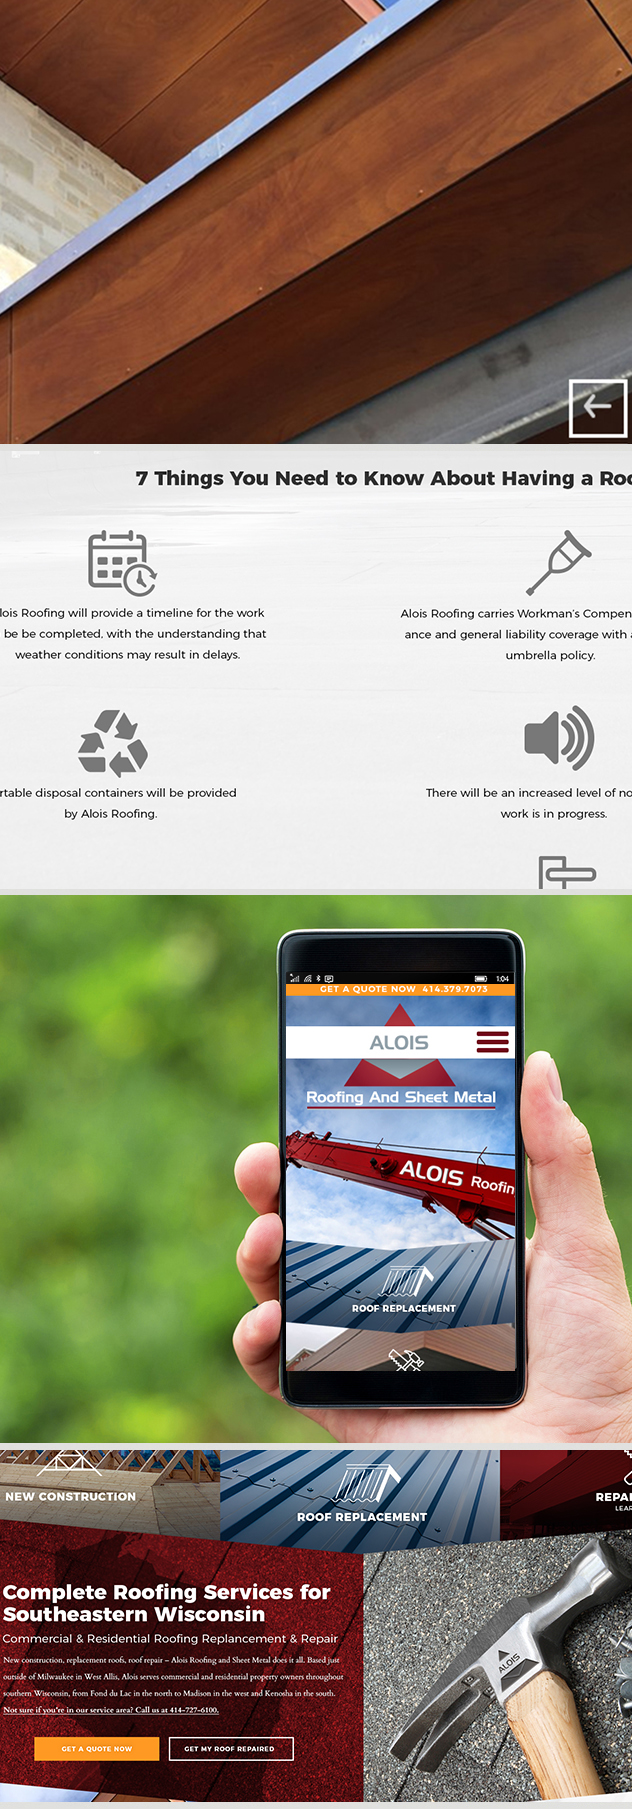 Milwaukee web design and development for Alois Roofing and Sheet Metal